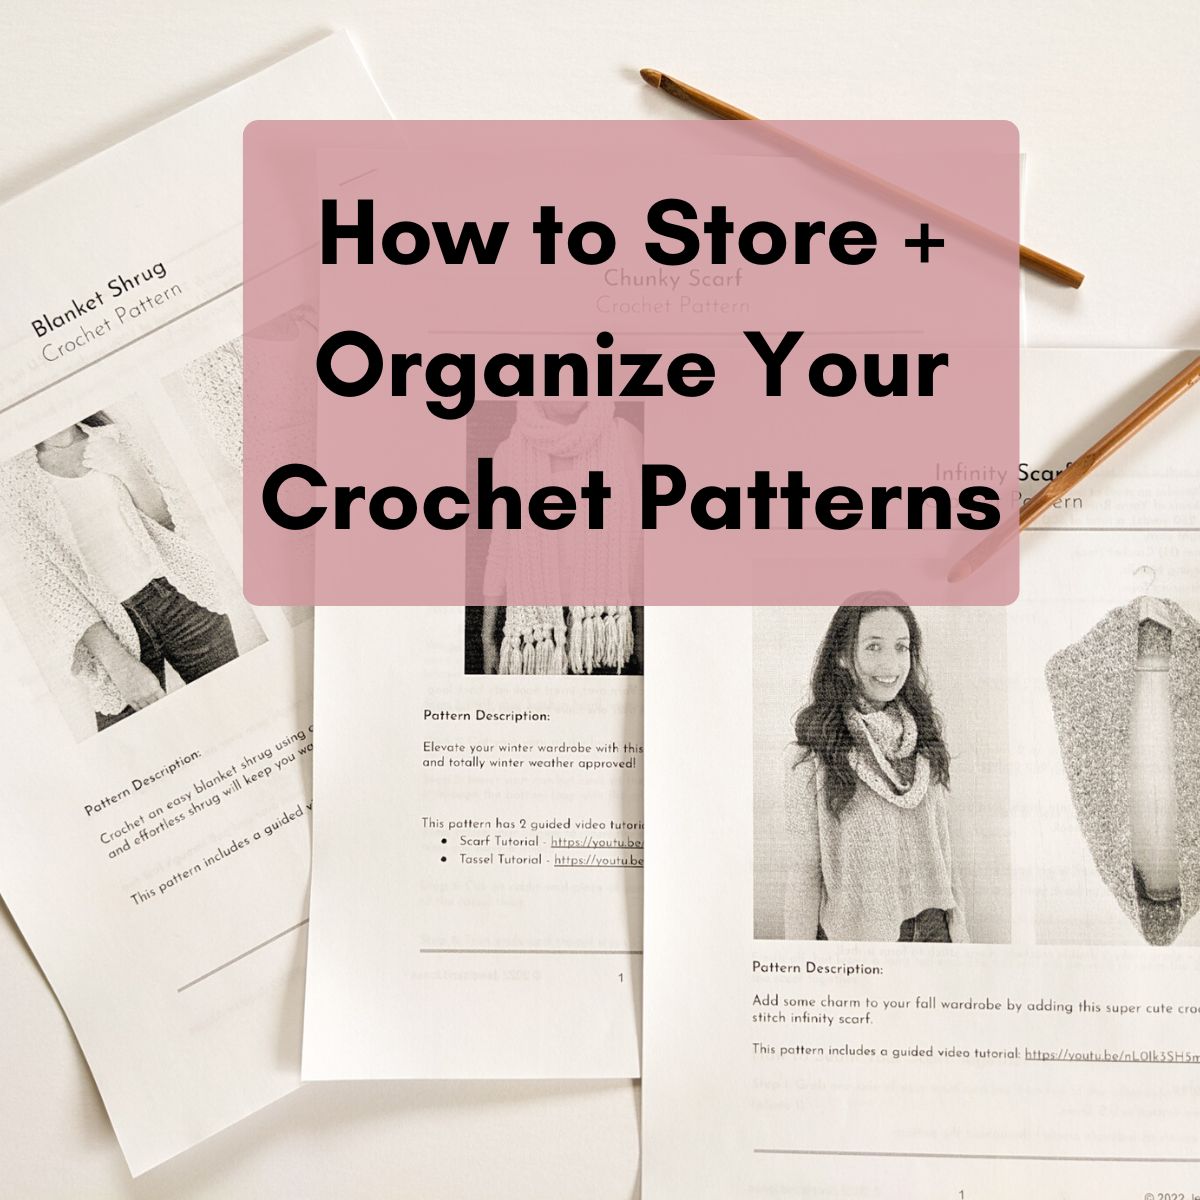 How to store and organize your crochet patterns.